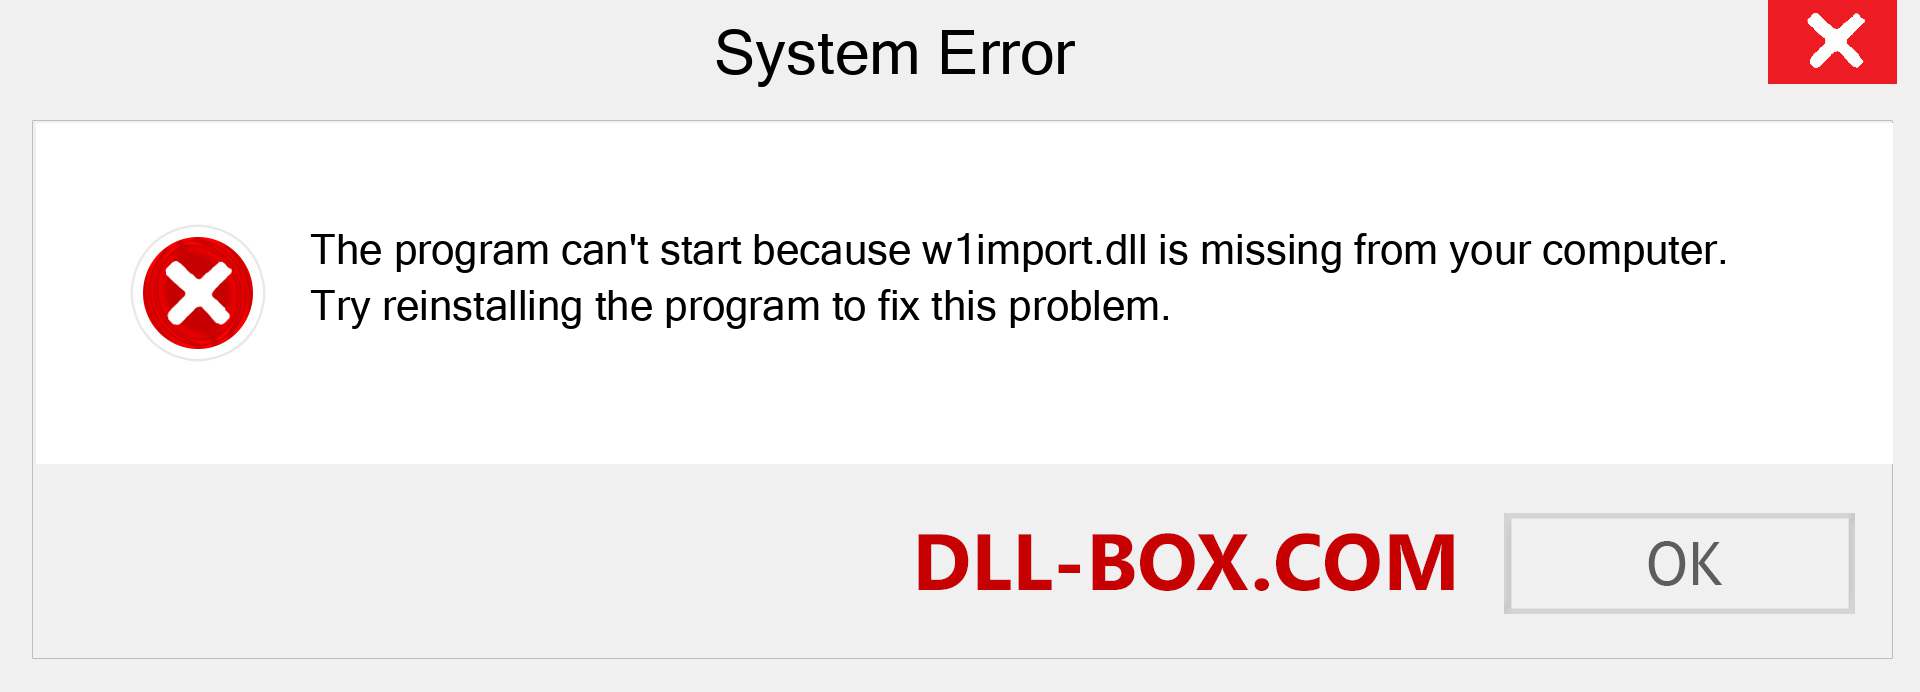  w1import.dll file is missing?. Download for Windows 7, 8, 10 - Fix  w1import dll Missing Error on Windows, photos, images